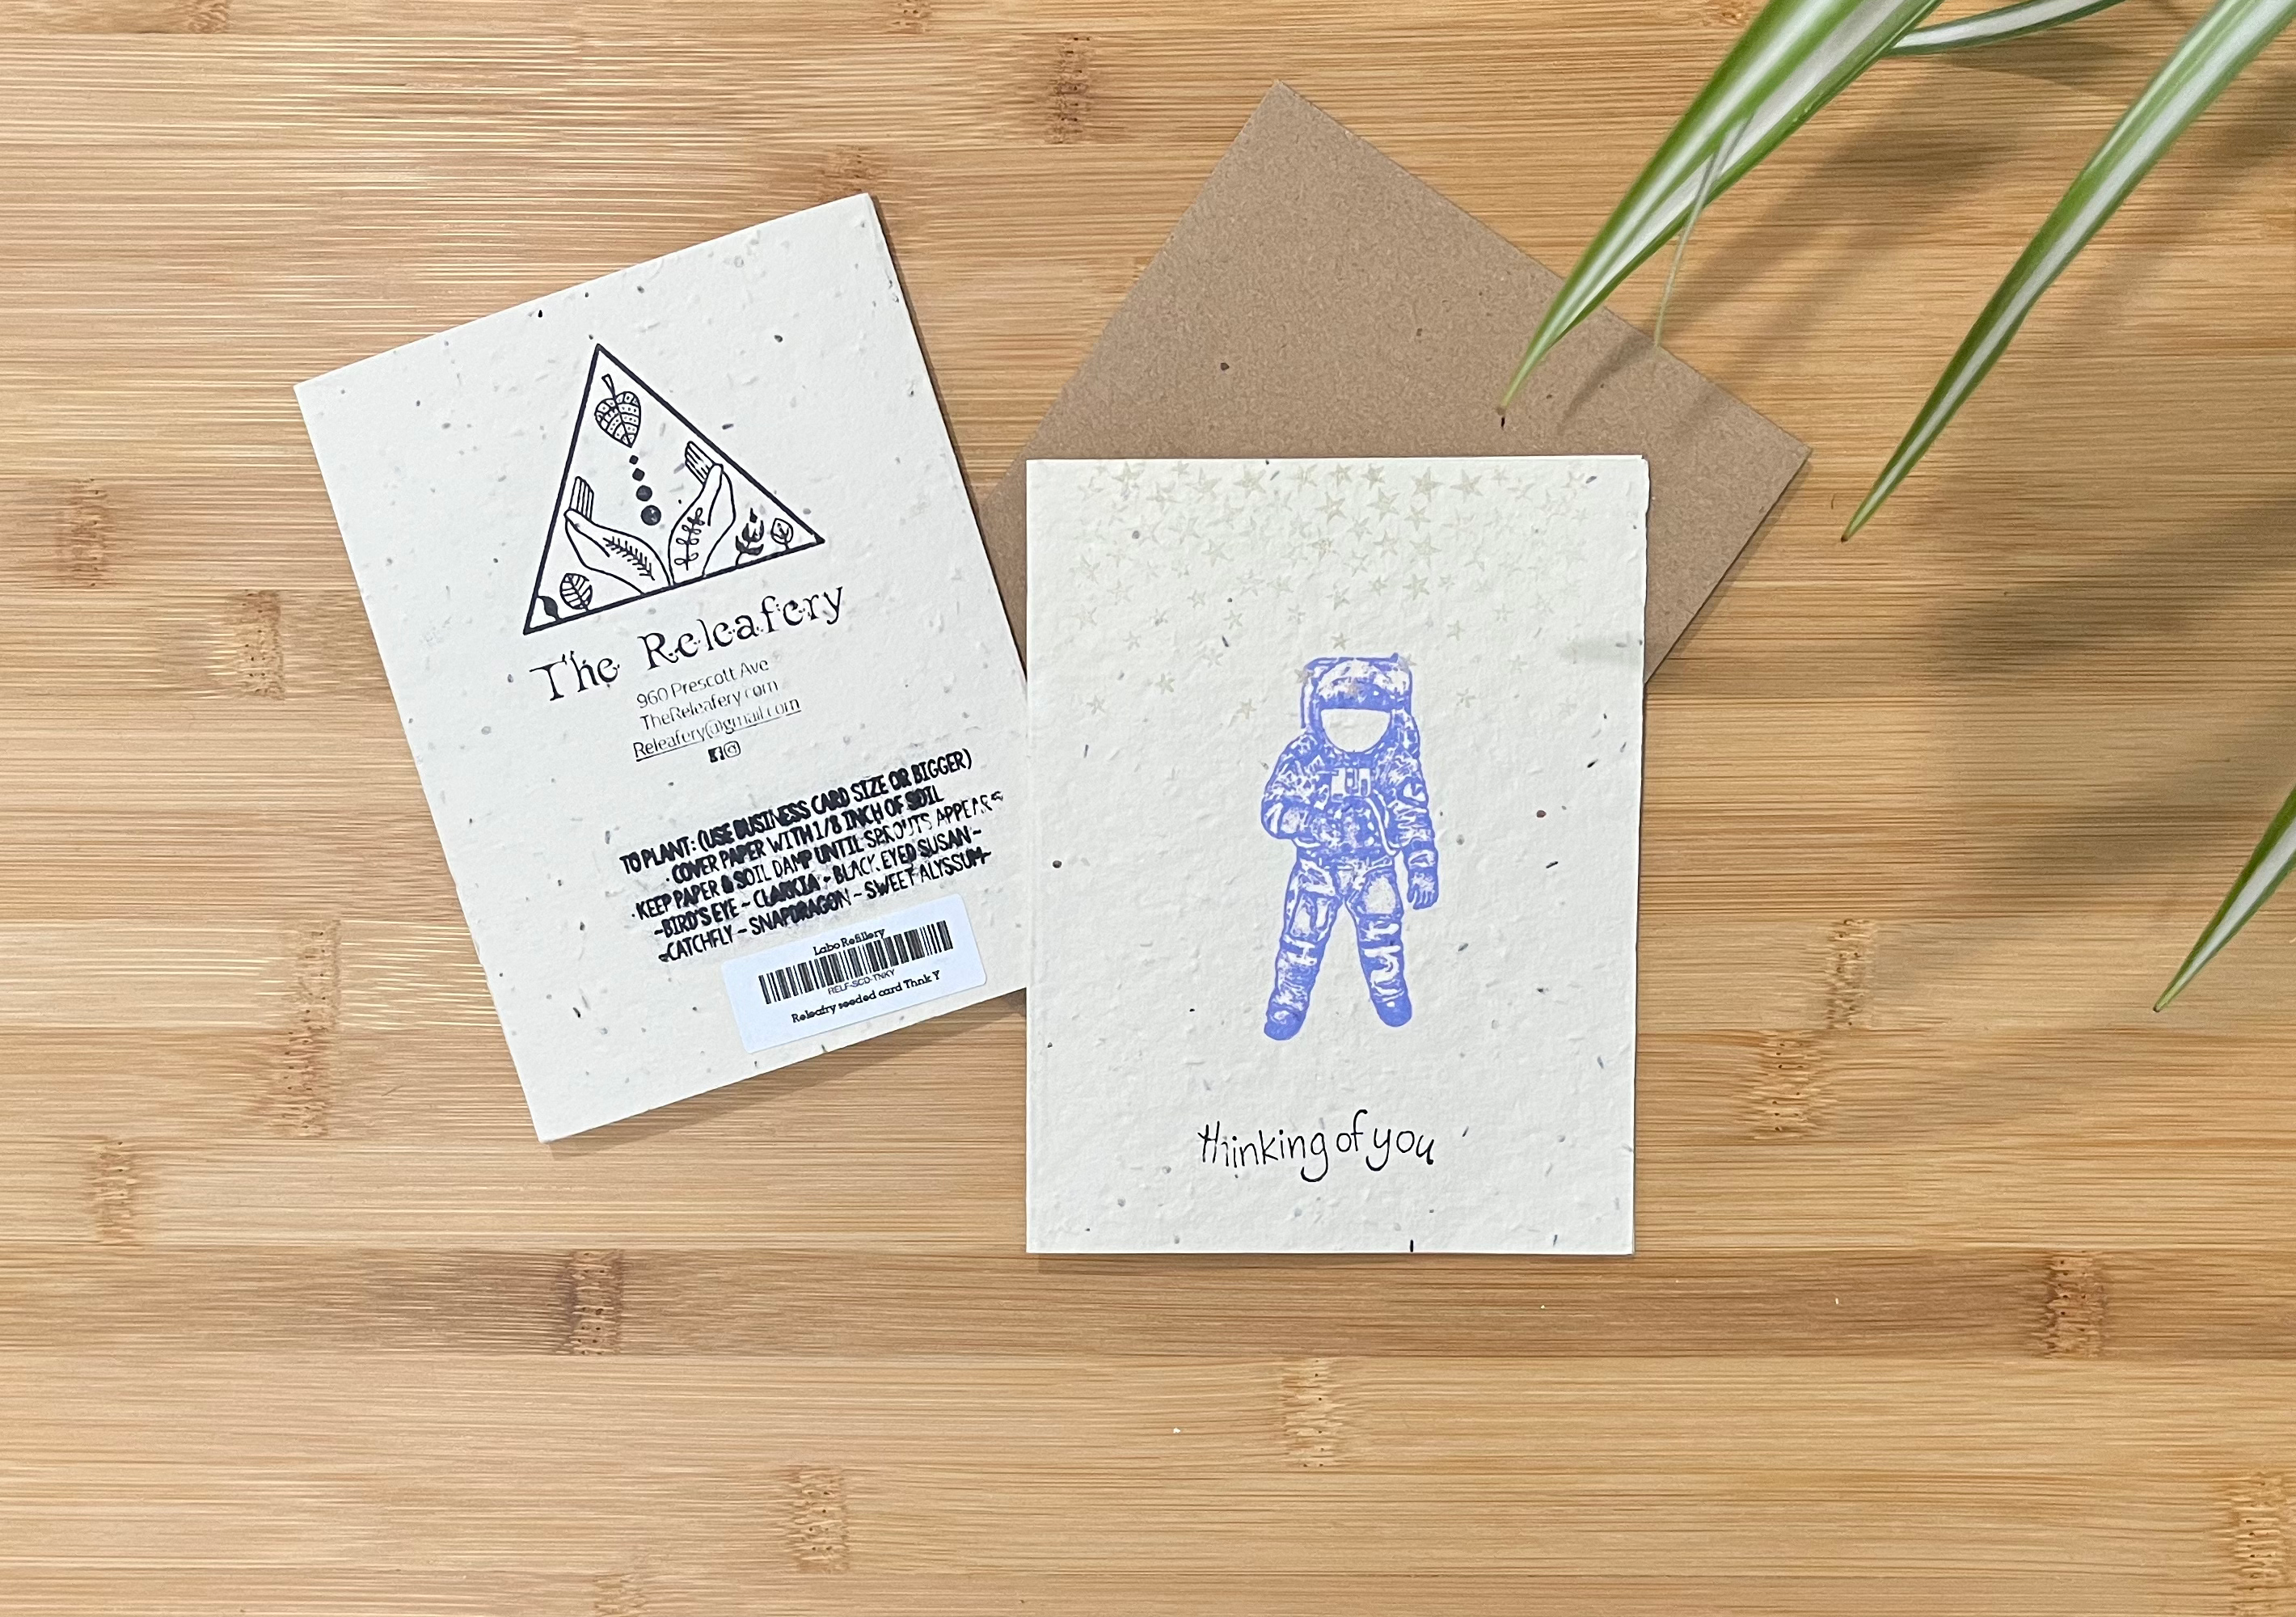 Releafery THINKING OF YOU Seeded Greeting Cards-Plantable-Zero Waste